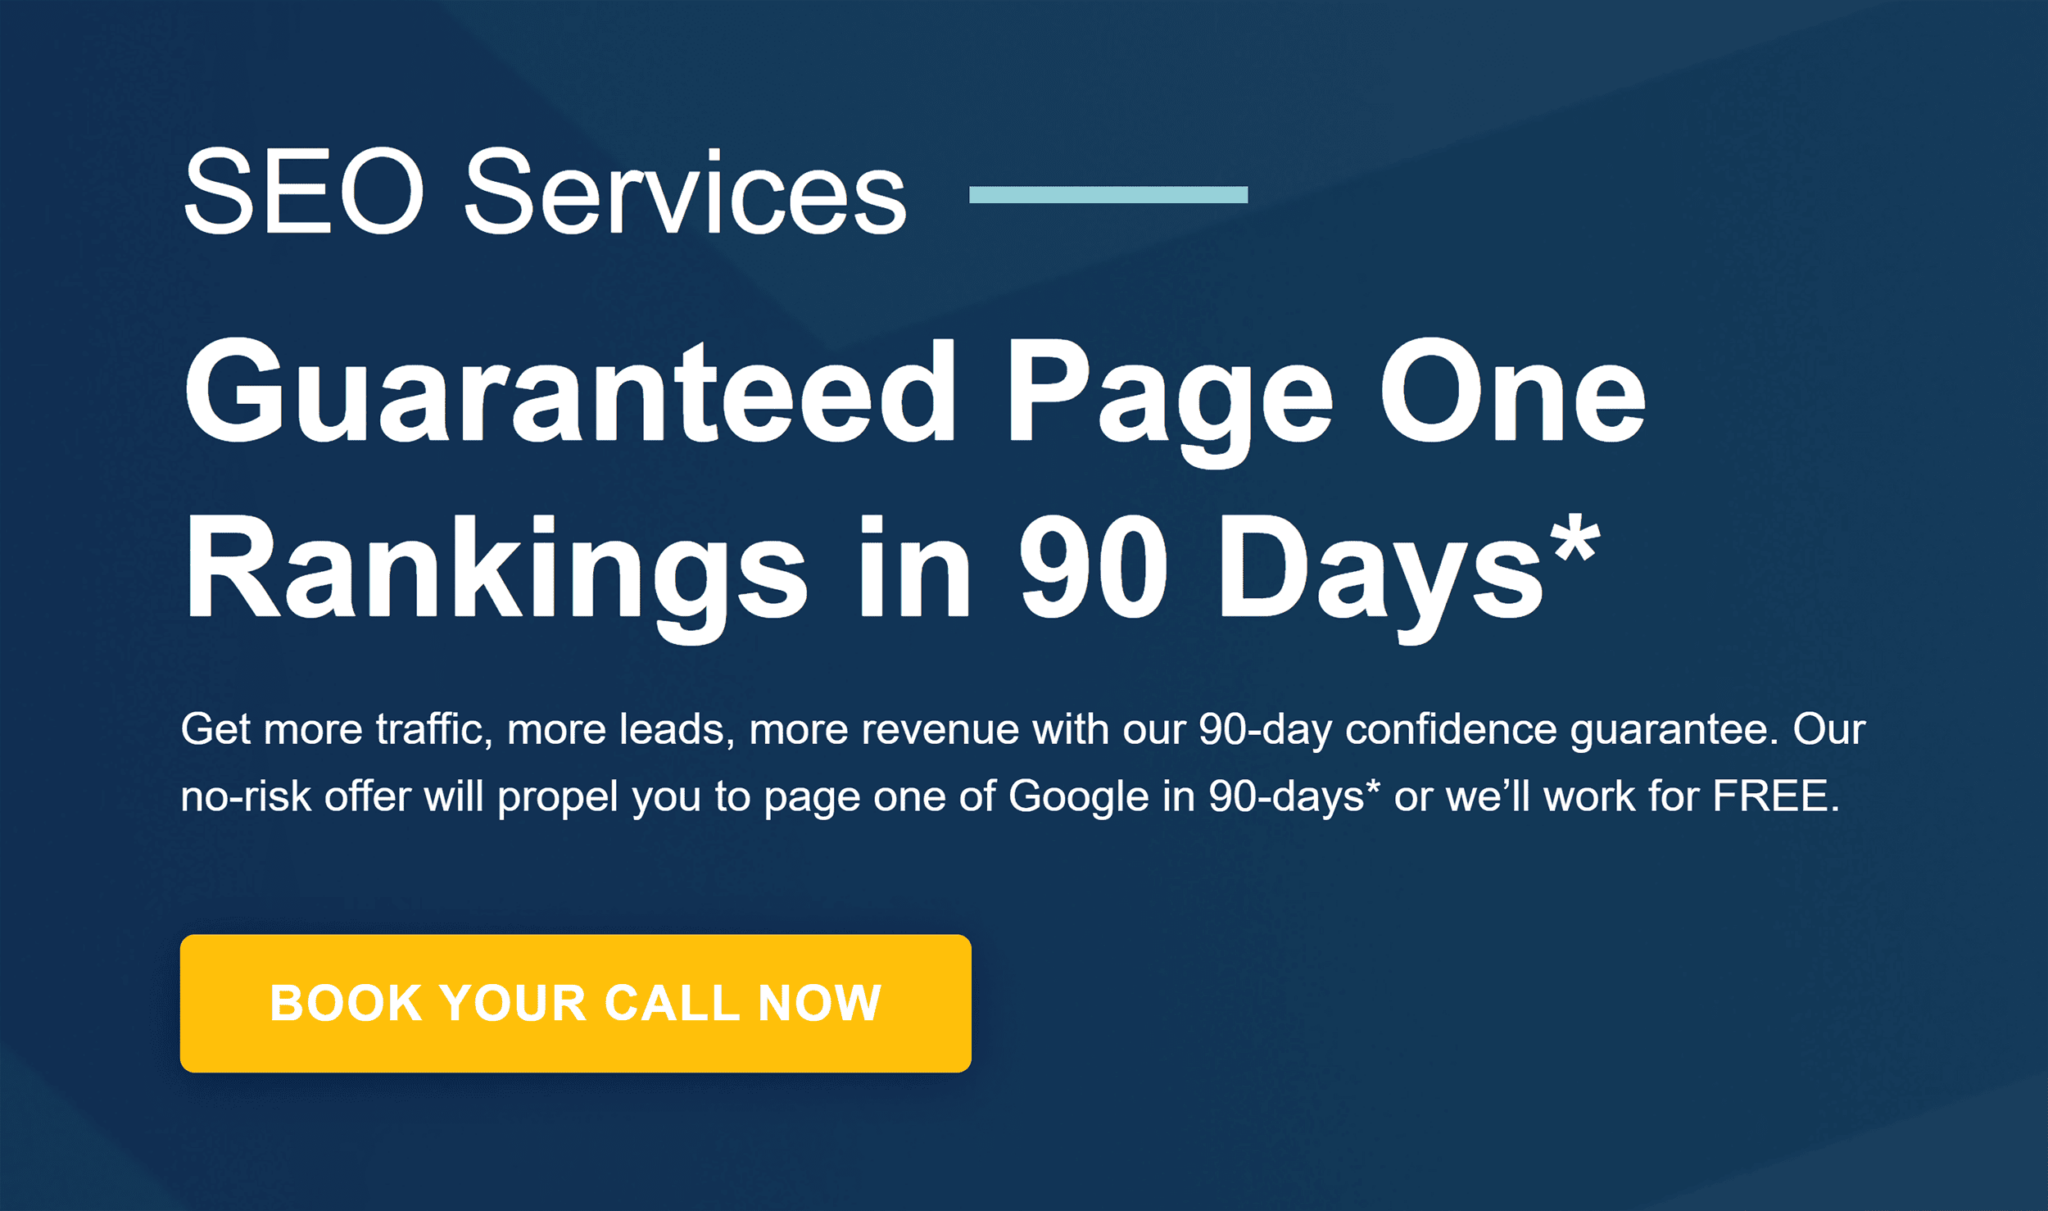 seo-services-guarantee-results SEO Consultants Guide: When to Hire and What to Expect